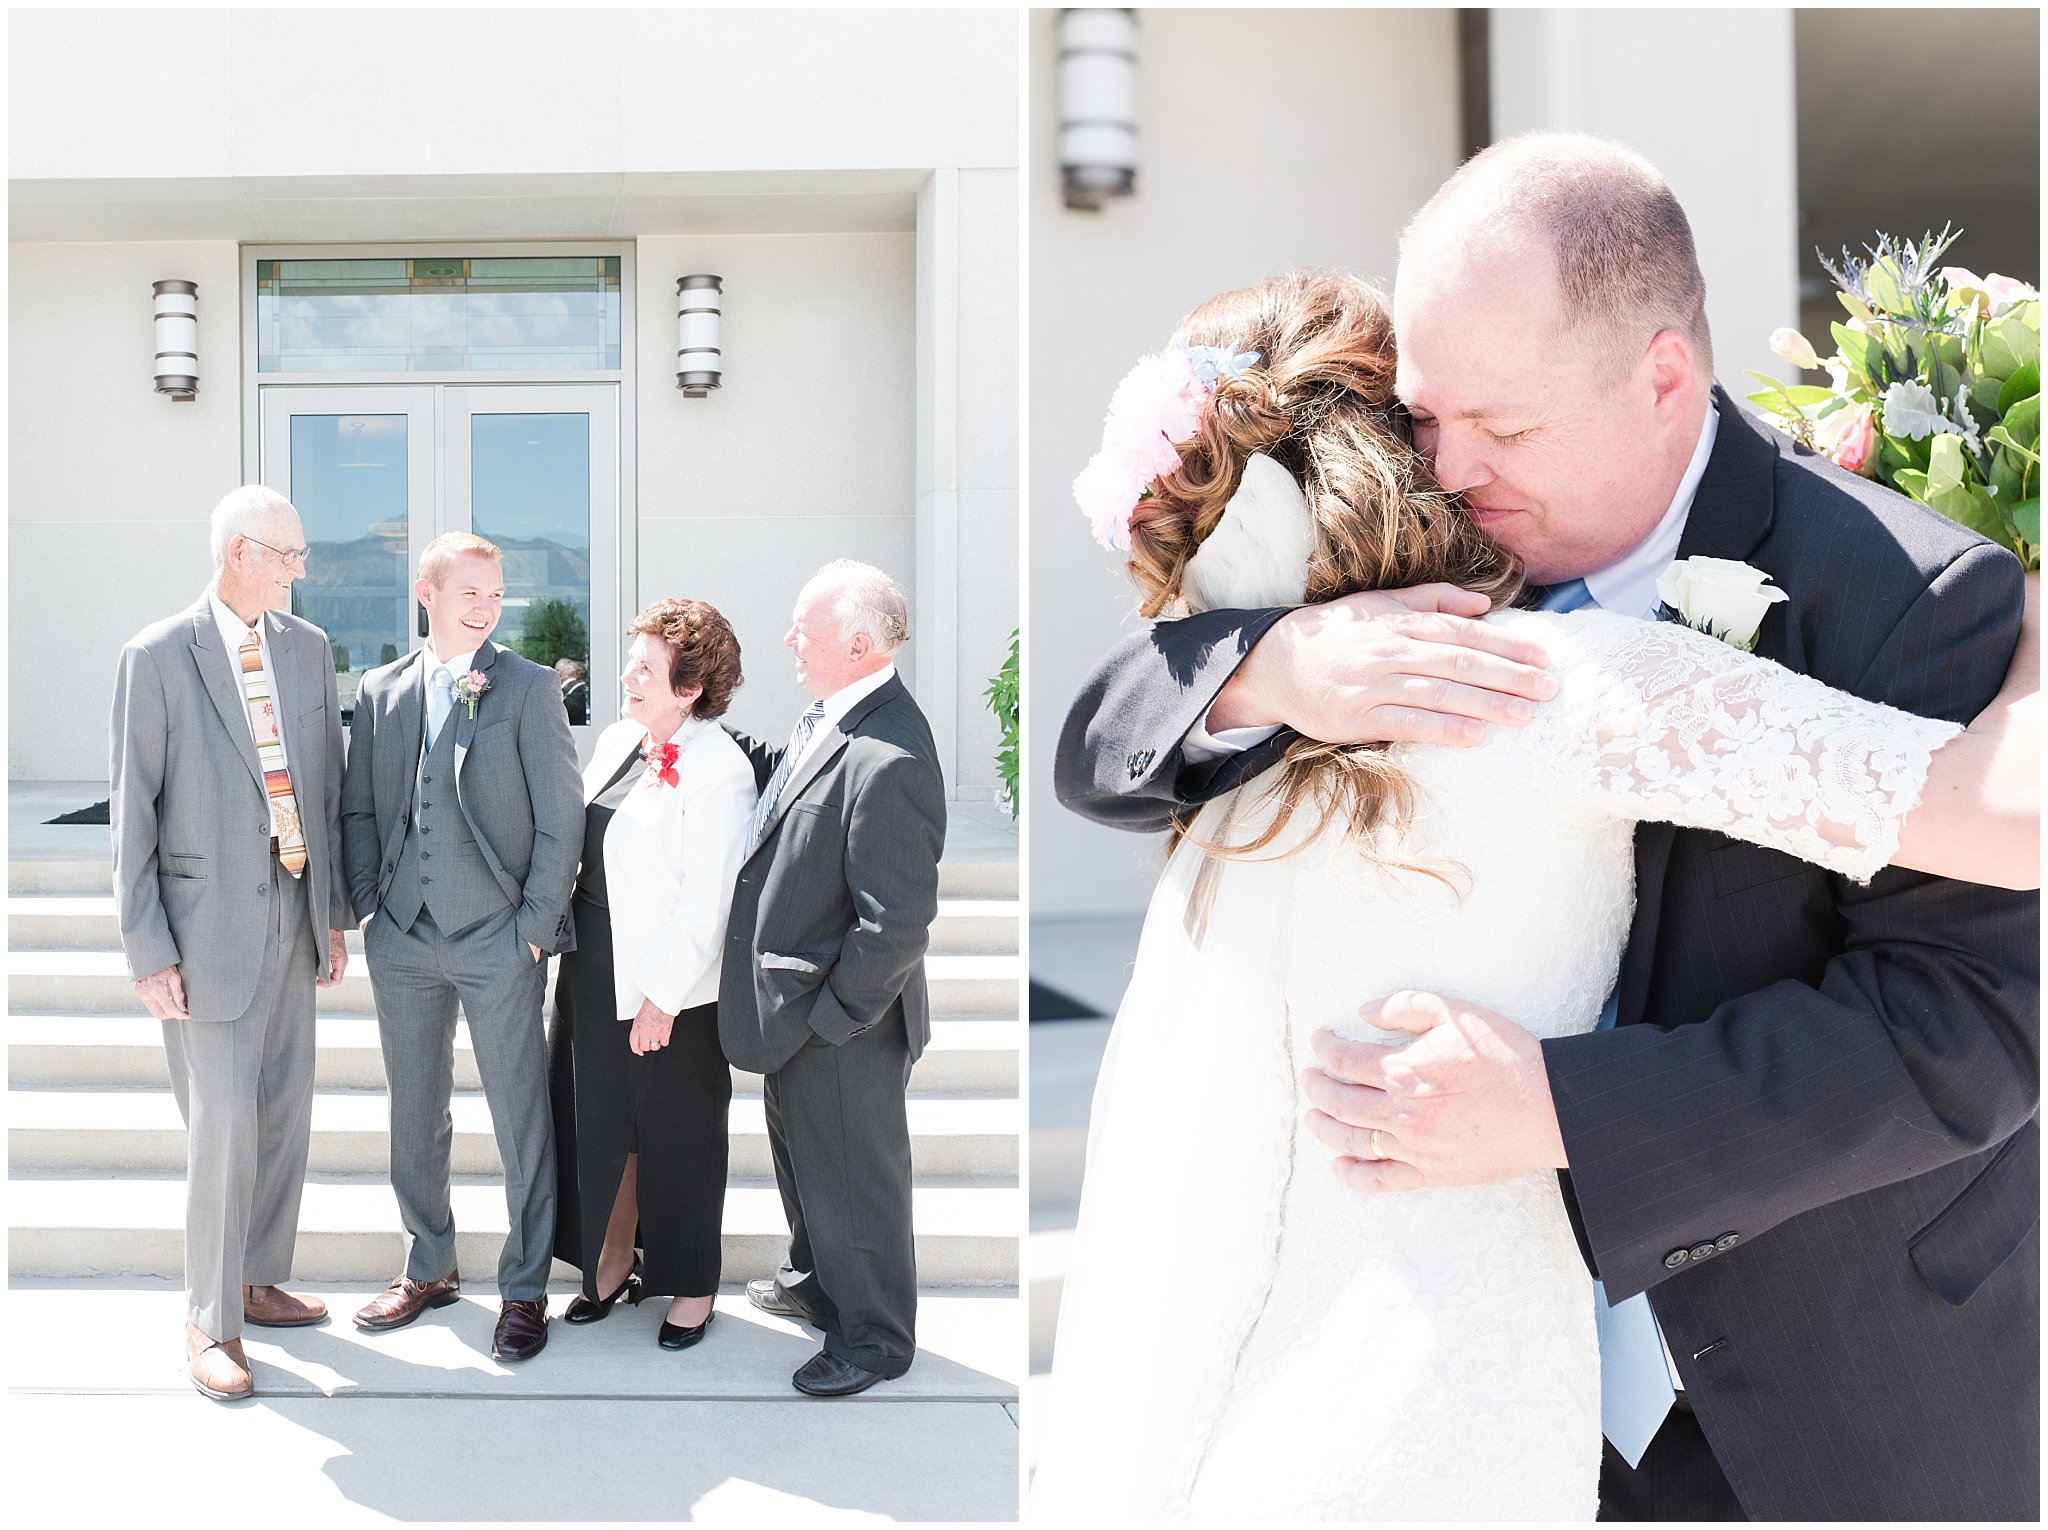 Bride with lace wedding dress and veil and groom wearing grey suit with light blue tie | Family portraits | Ogden Temple Summer Wedding | Jessie and Dallin Photography